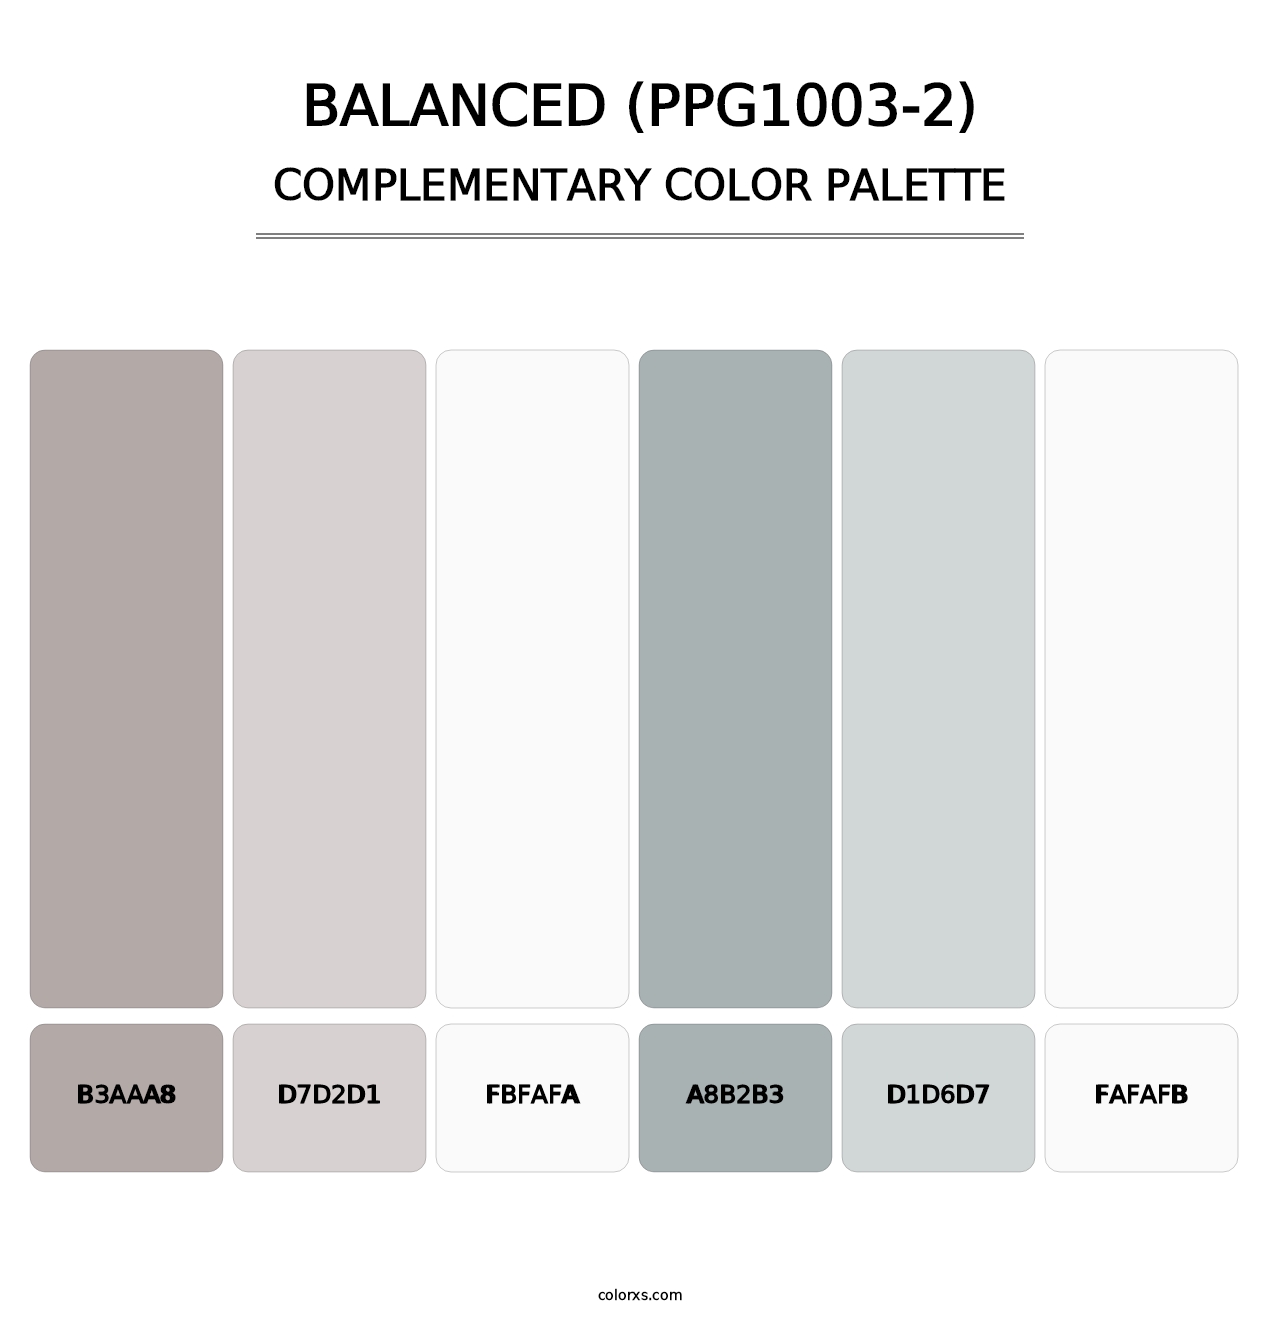 Balanced (PPG1003-2) - Complementary Color Palette